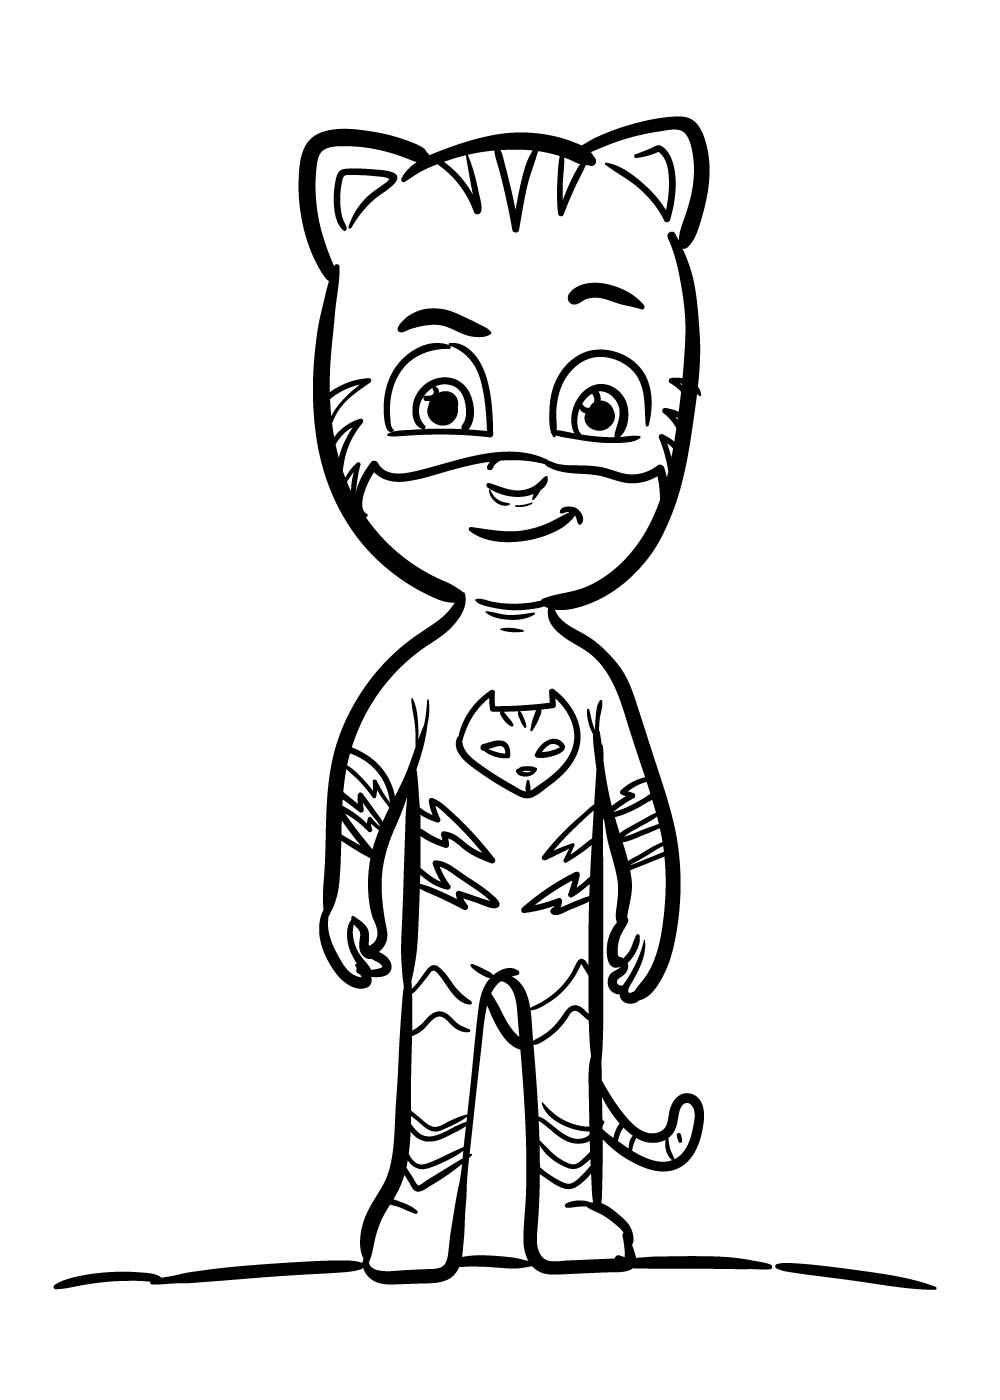 Catboy PJ Masks coloring page - Coloring pages